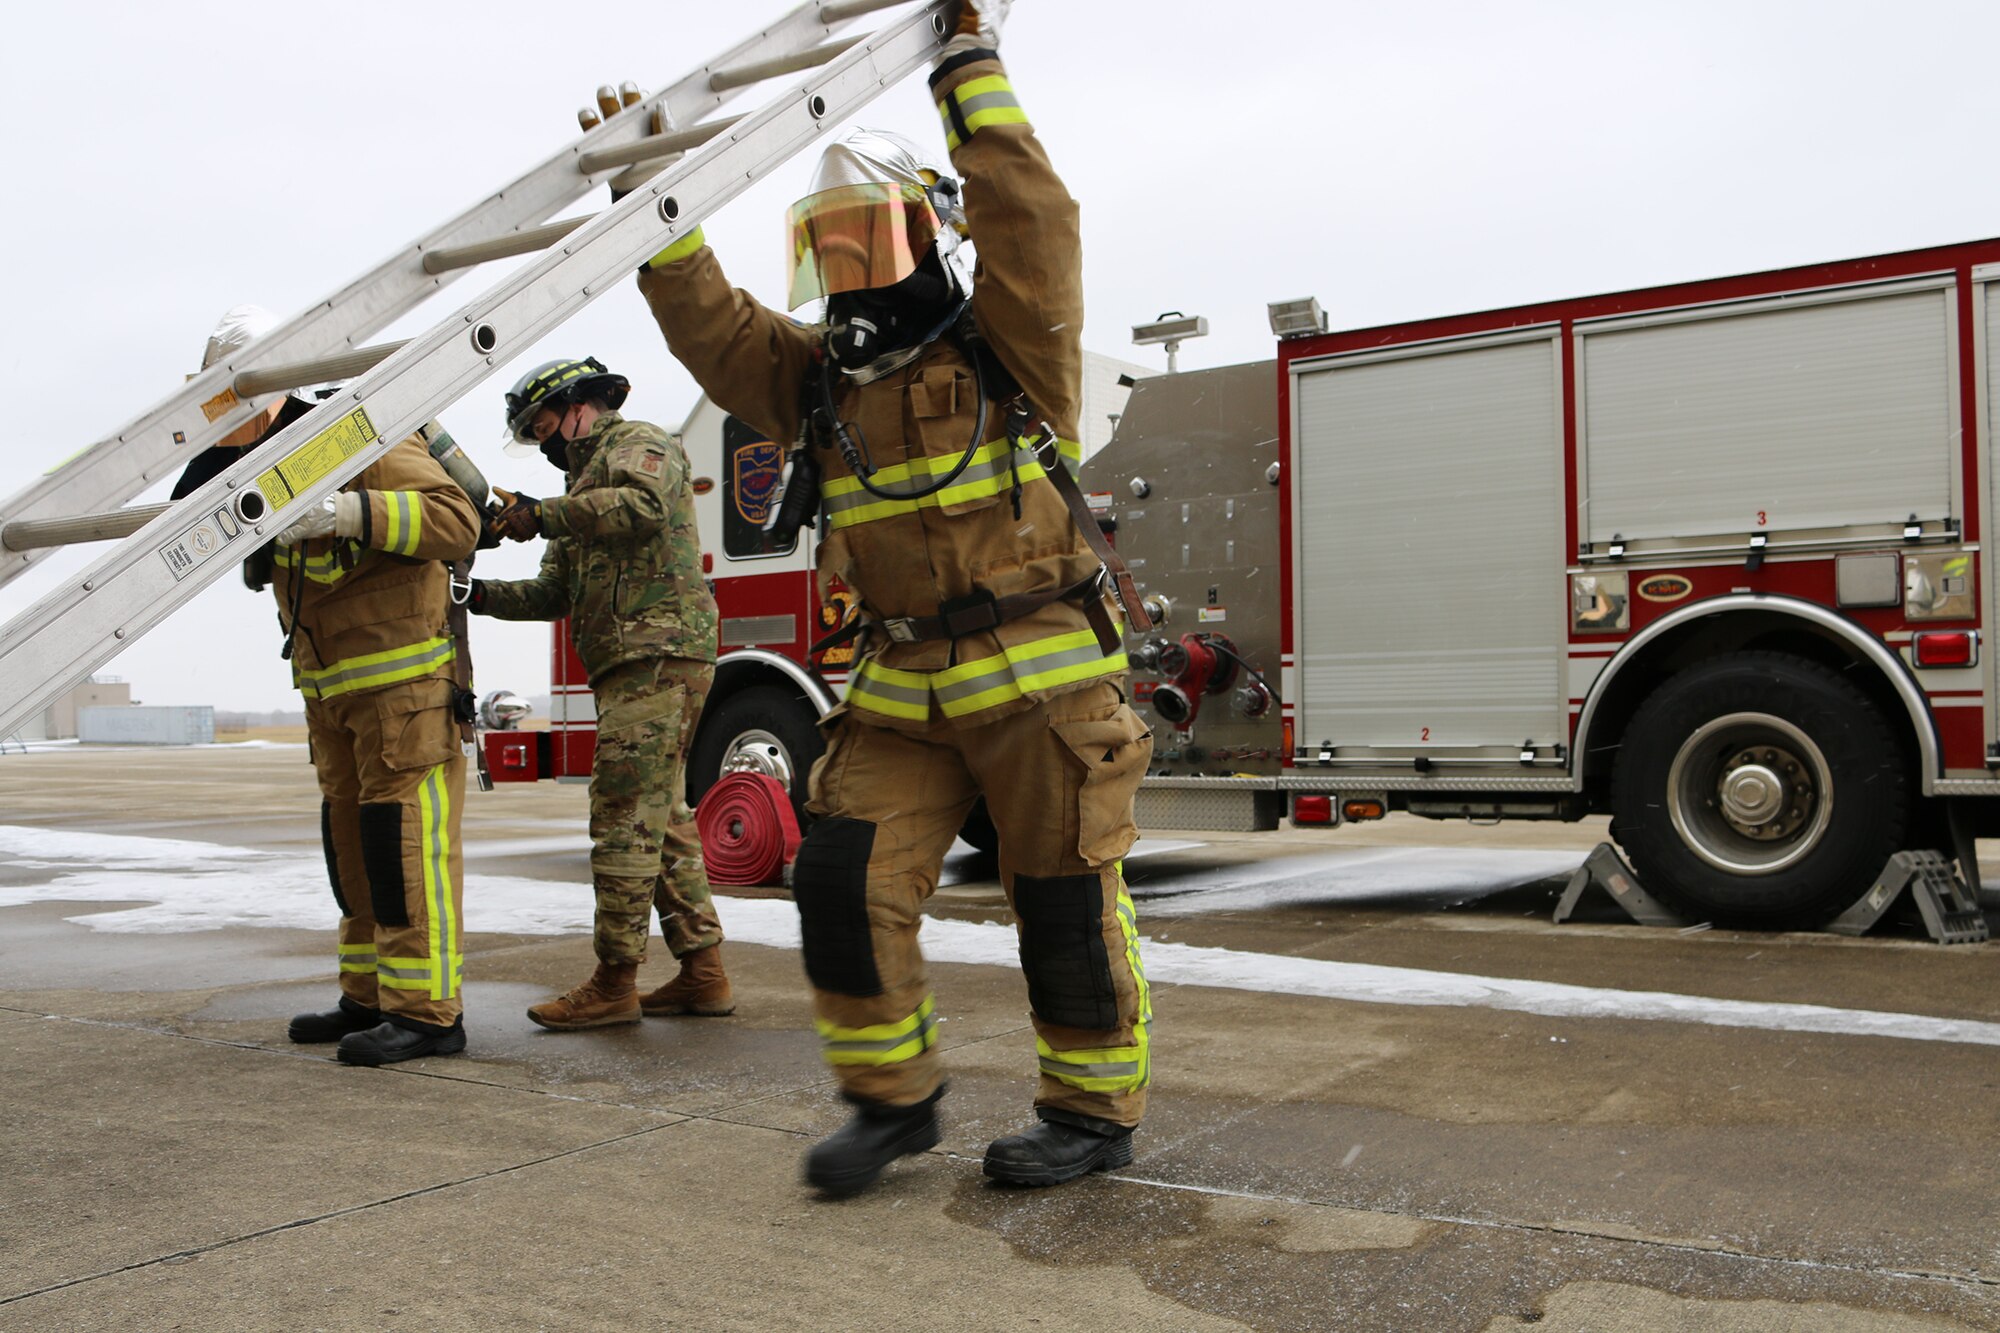 Firefighters raise a ladder to practice functional movement in protective gear during joint firefighter integrated response ensemble training, Feb. 13, 2022. Firefighters in the 445th Civil Engineer Squadron suited up in multiple pairs of pants, heavy-duty gloves and special helmets then worked through a functional obstacle course which incorporated traditional duty tasks like dragging a hose in a kneeling position, raising ladders, squatting, pivoting and carrying objects.